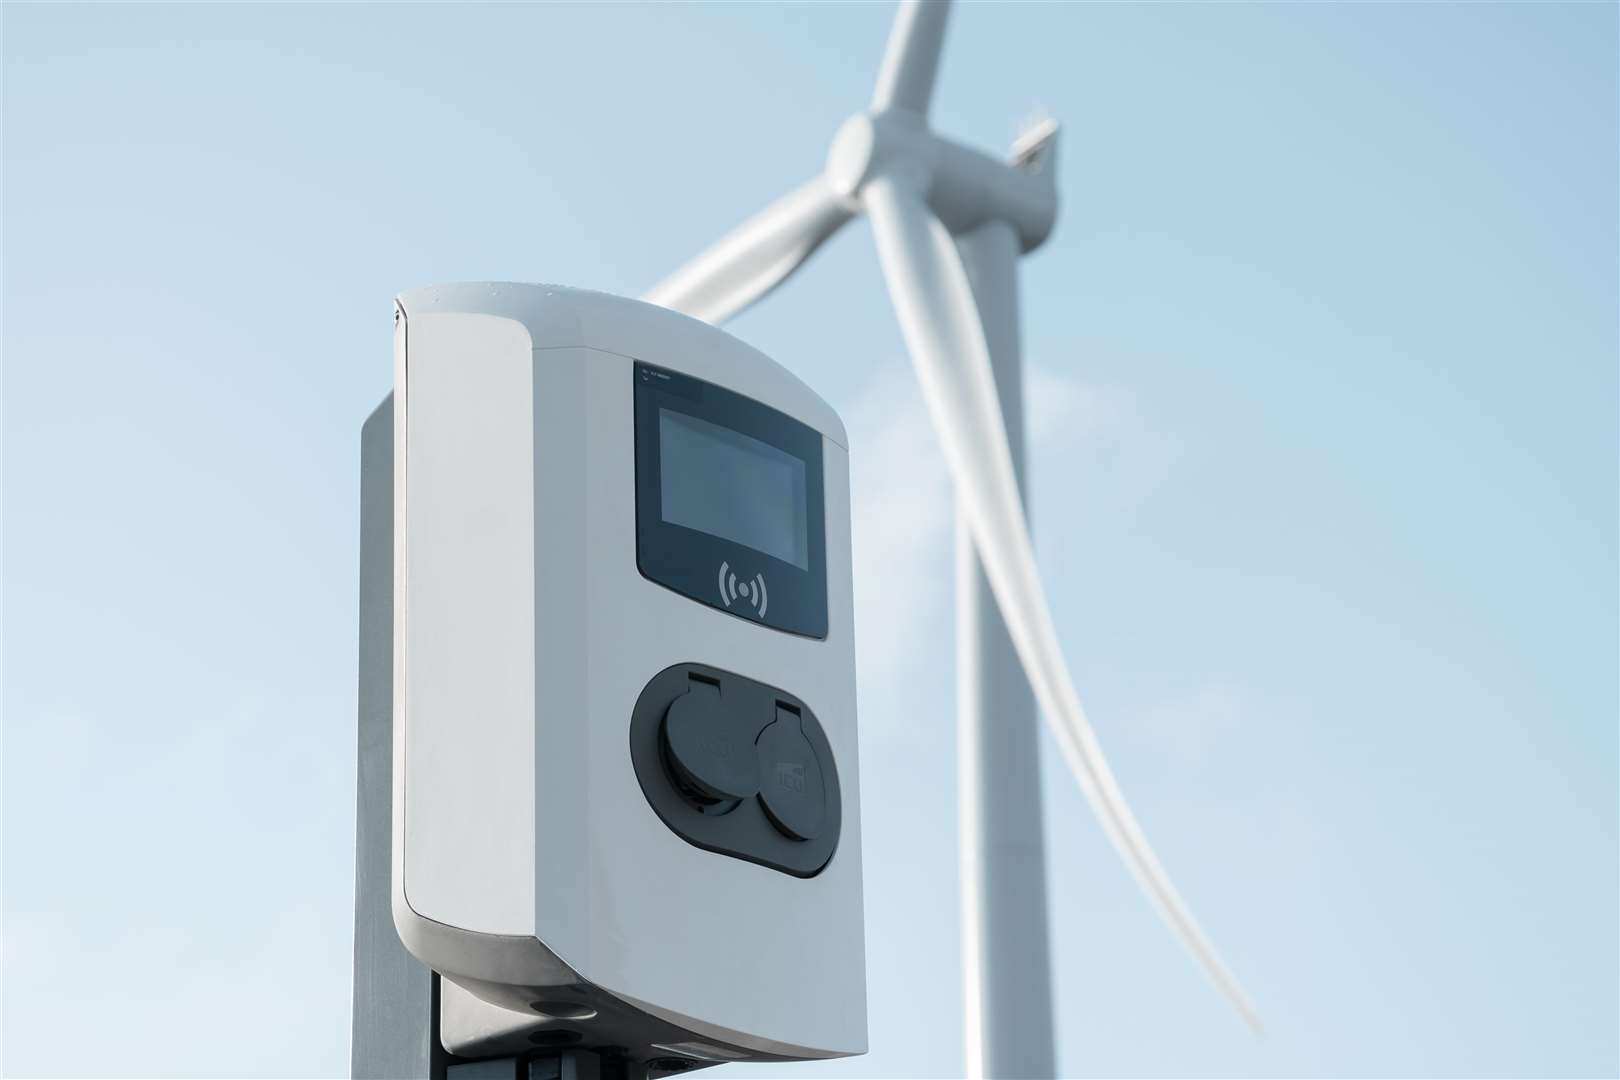 Renewable energy points will be installed across Canterbury district (6377204)